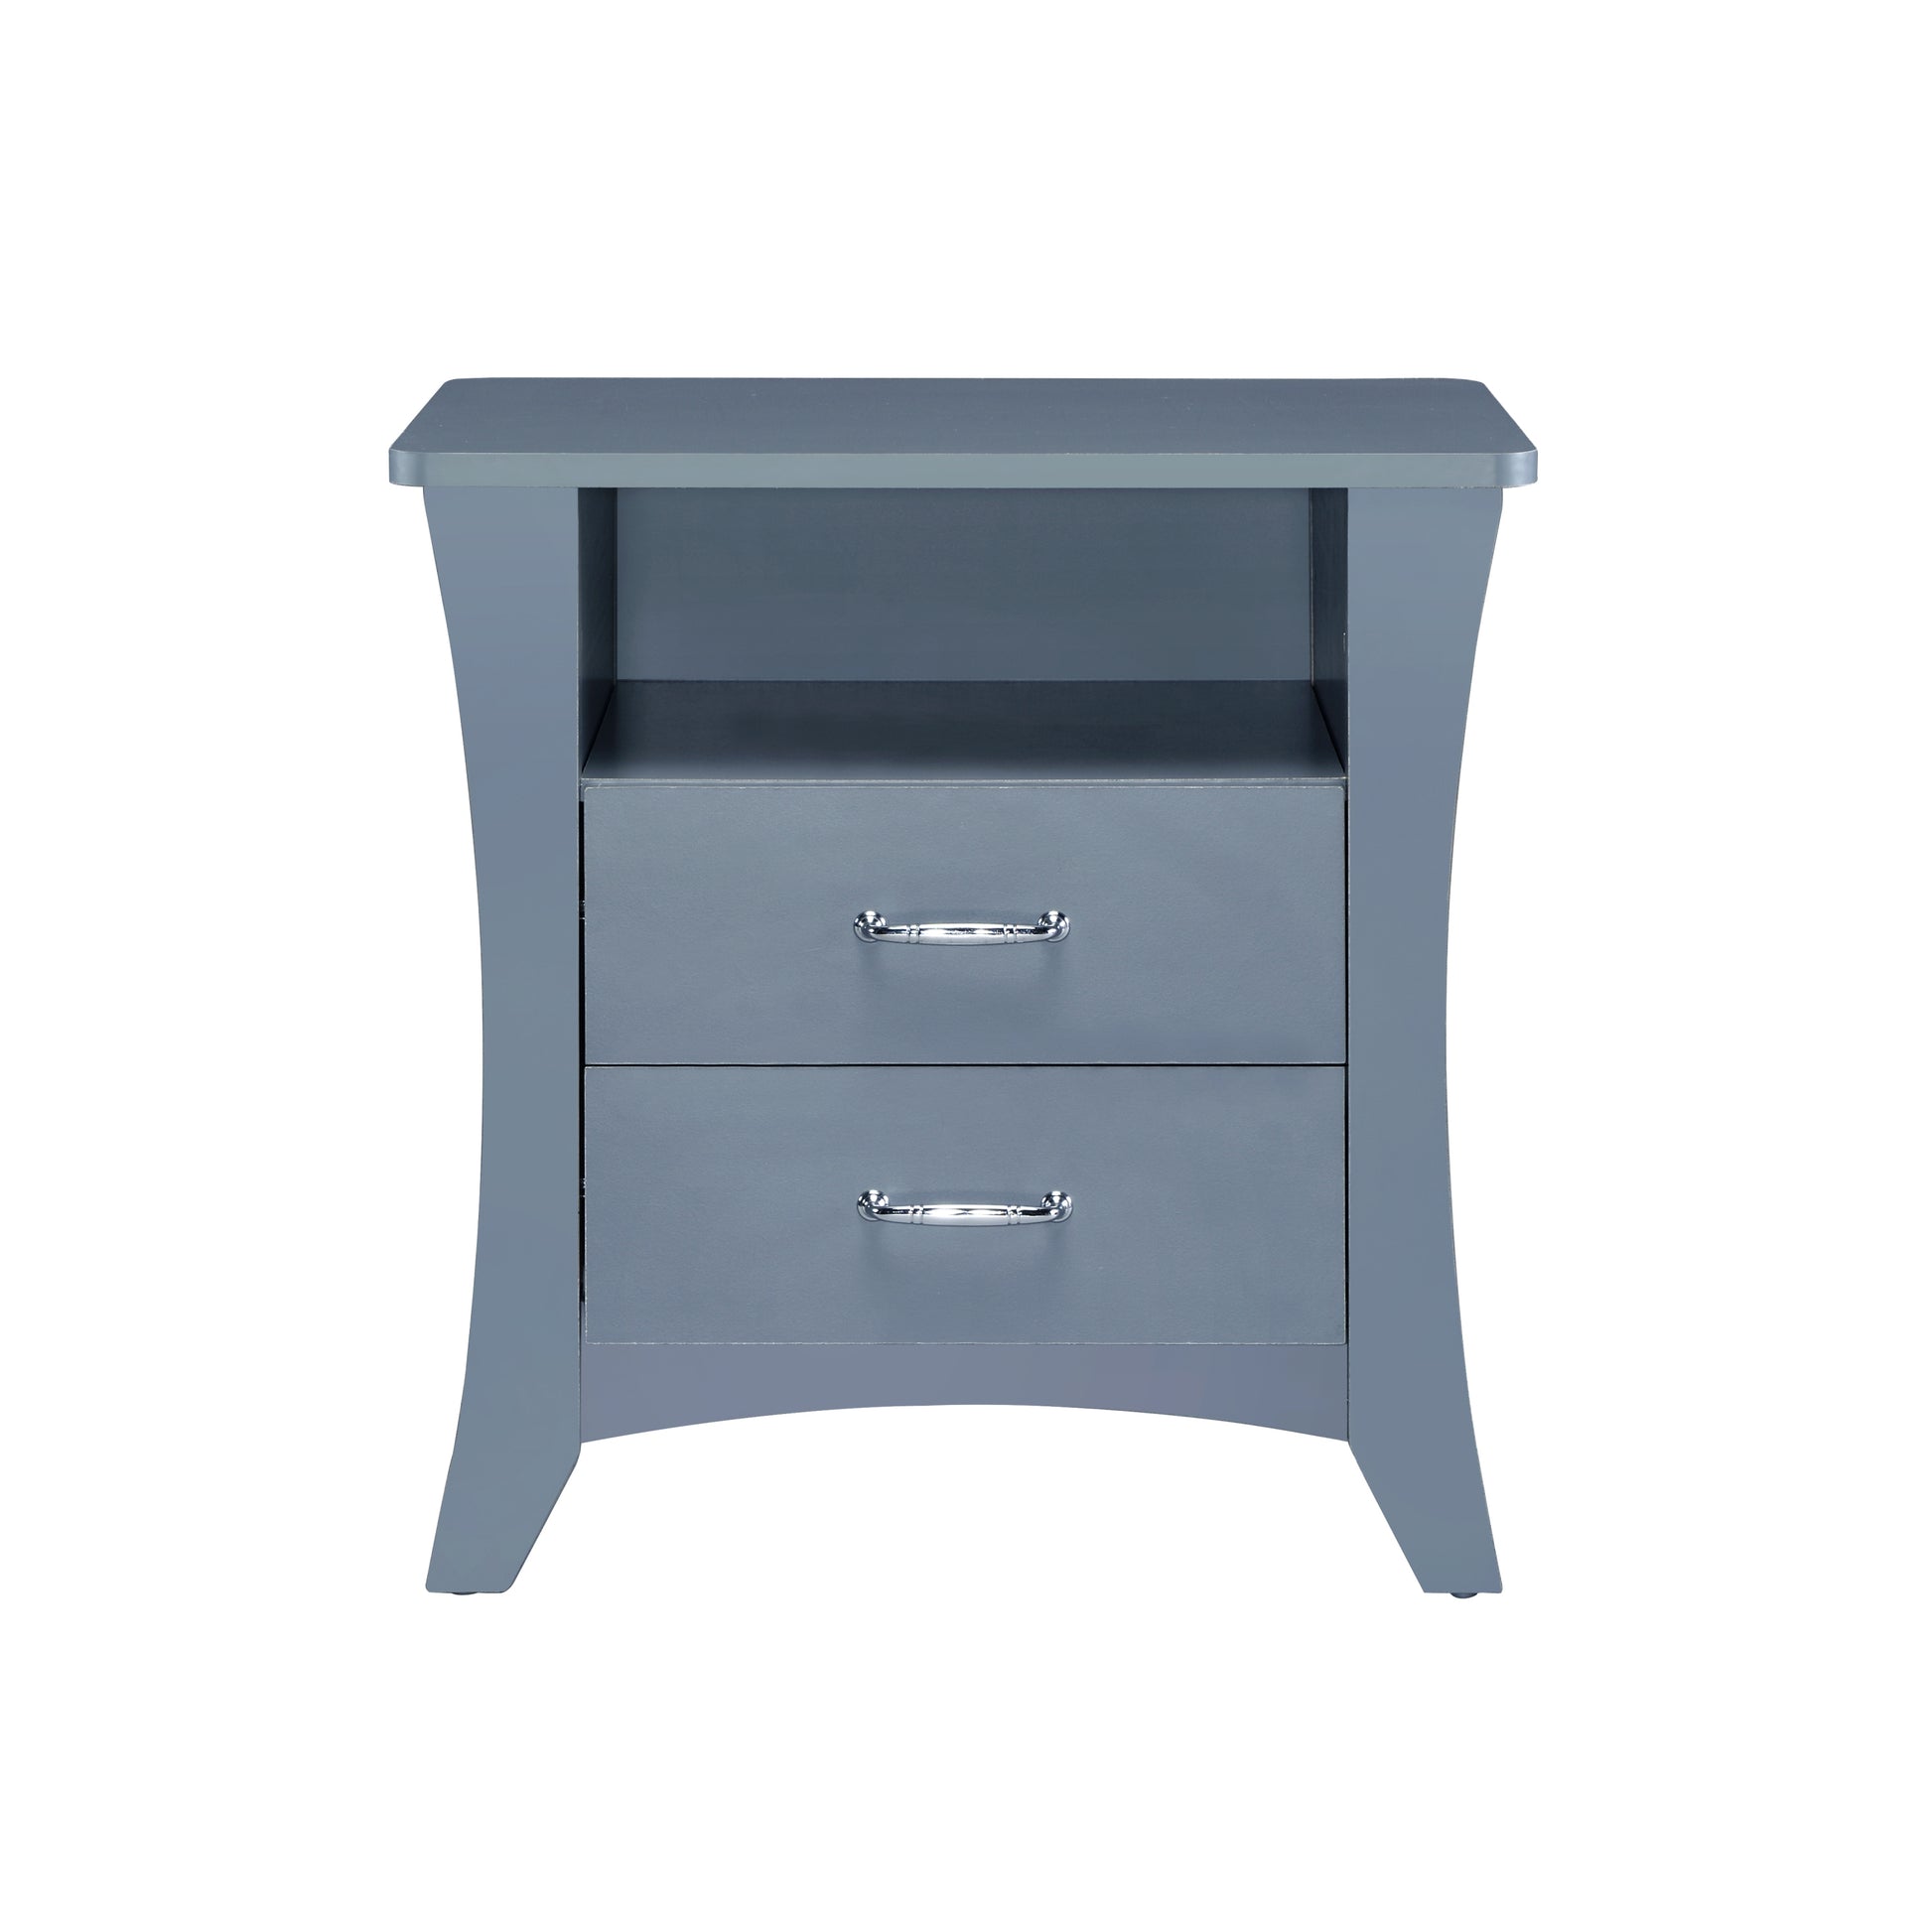 ACME Colt Nightstand in Gray Finish AC00382